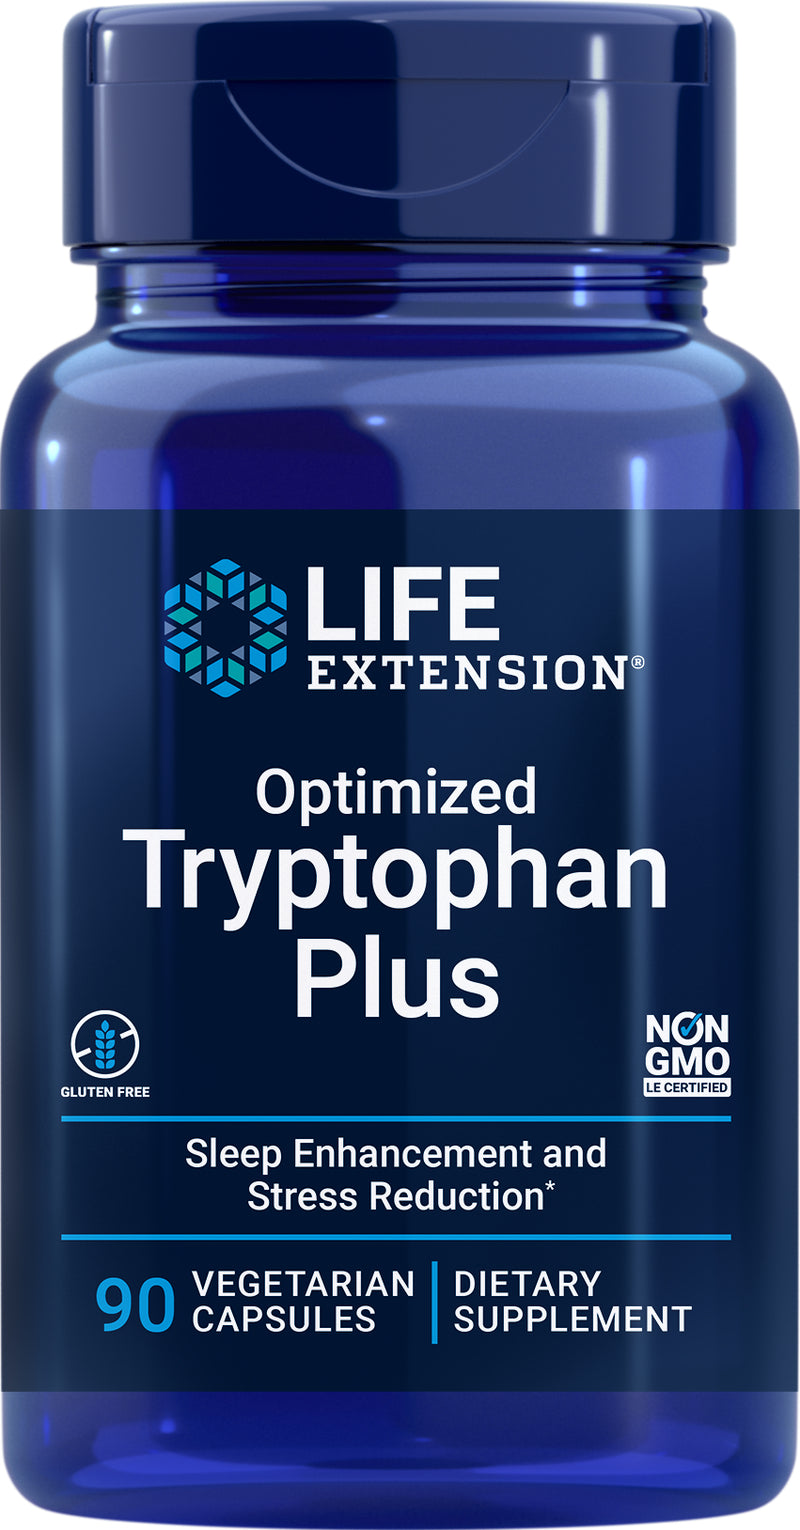 Optimized Tryptophan Plus 90 vegetarian capsules by Life Extension